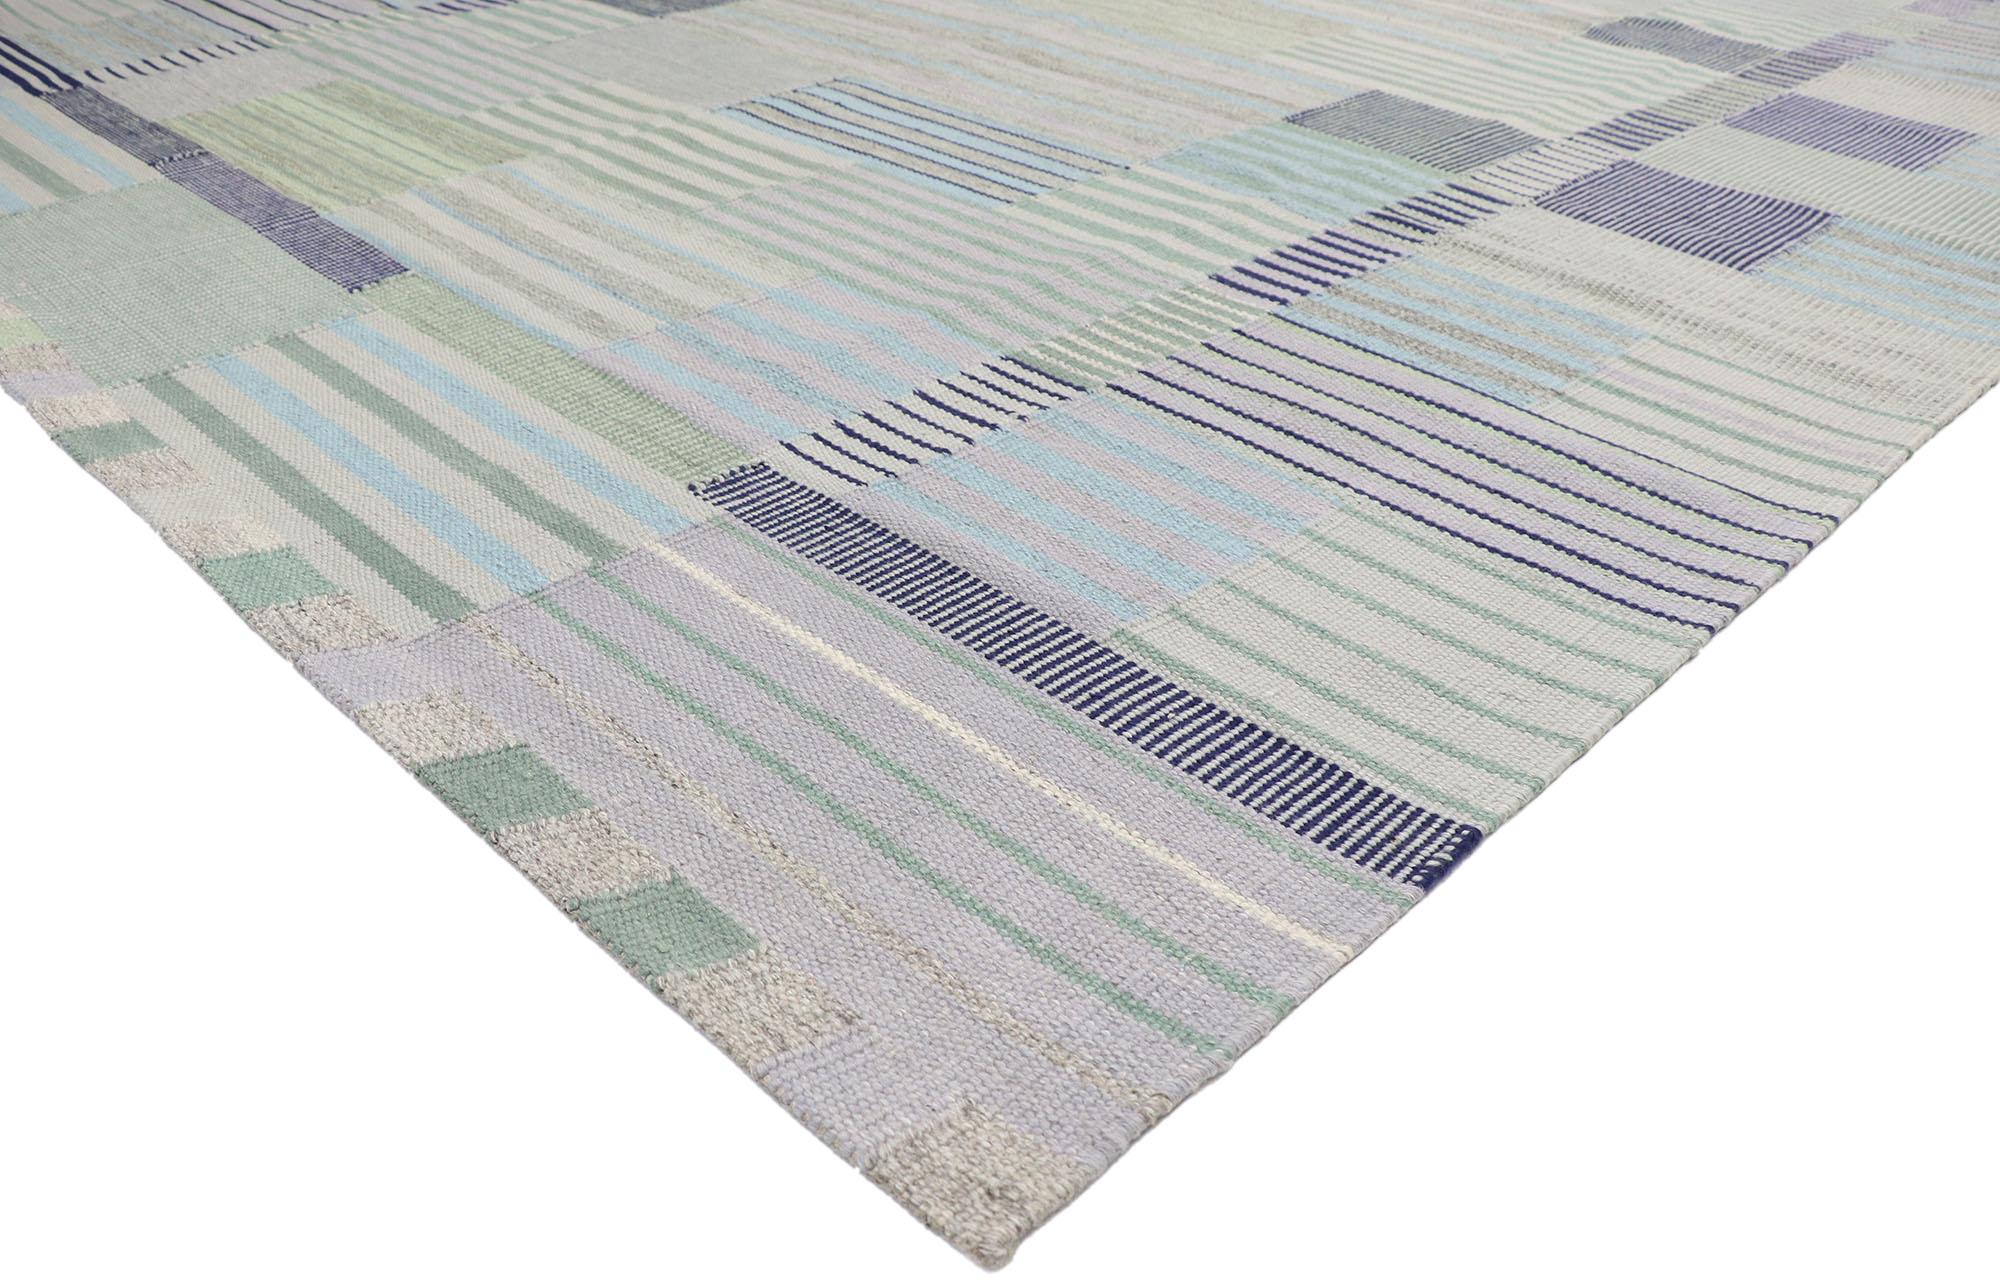 30636 New Marianne Richter Swedish Inspired Kilim Rug, 10'03 x 12'10.
Drawing inspiration from Marianne Richter and her design Fasad Ljus, this handwoven wool Swedish style kilim rug is a captivation vision of woven beauty. The eye-catching linear